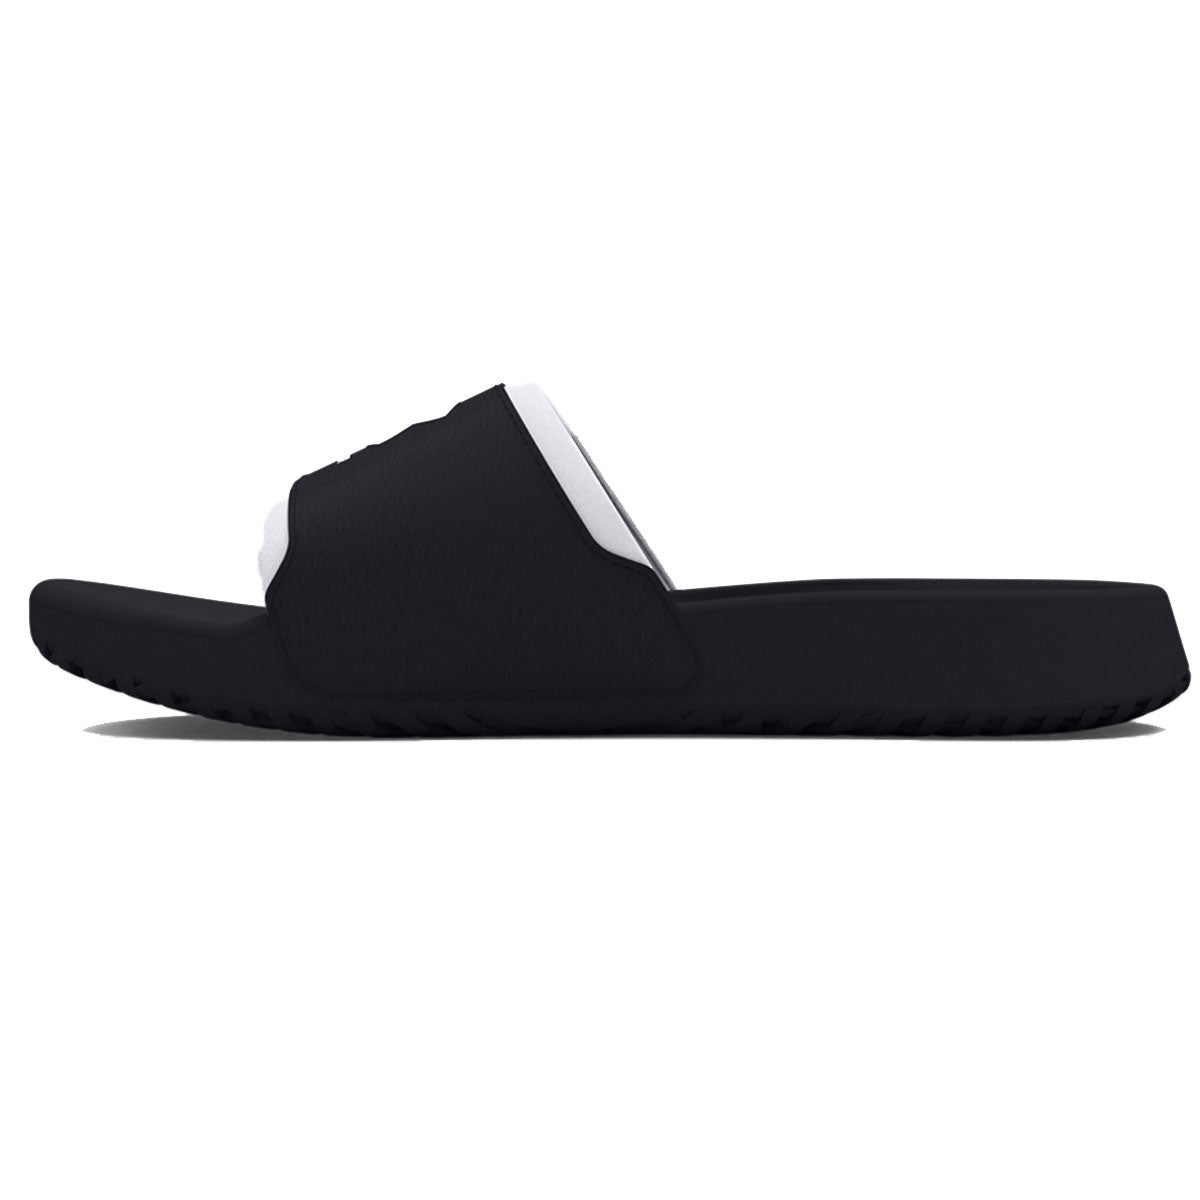 Under Armour Ignite Select Sliders - Womens - Black/White